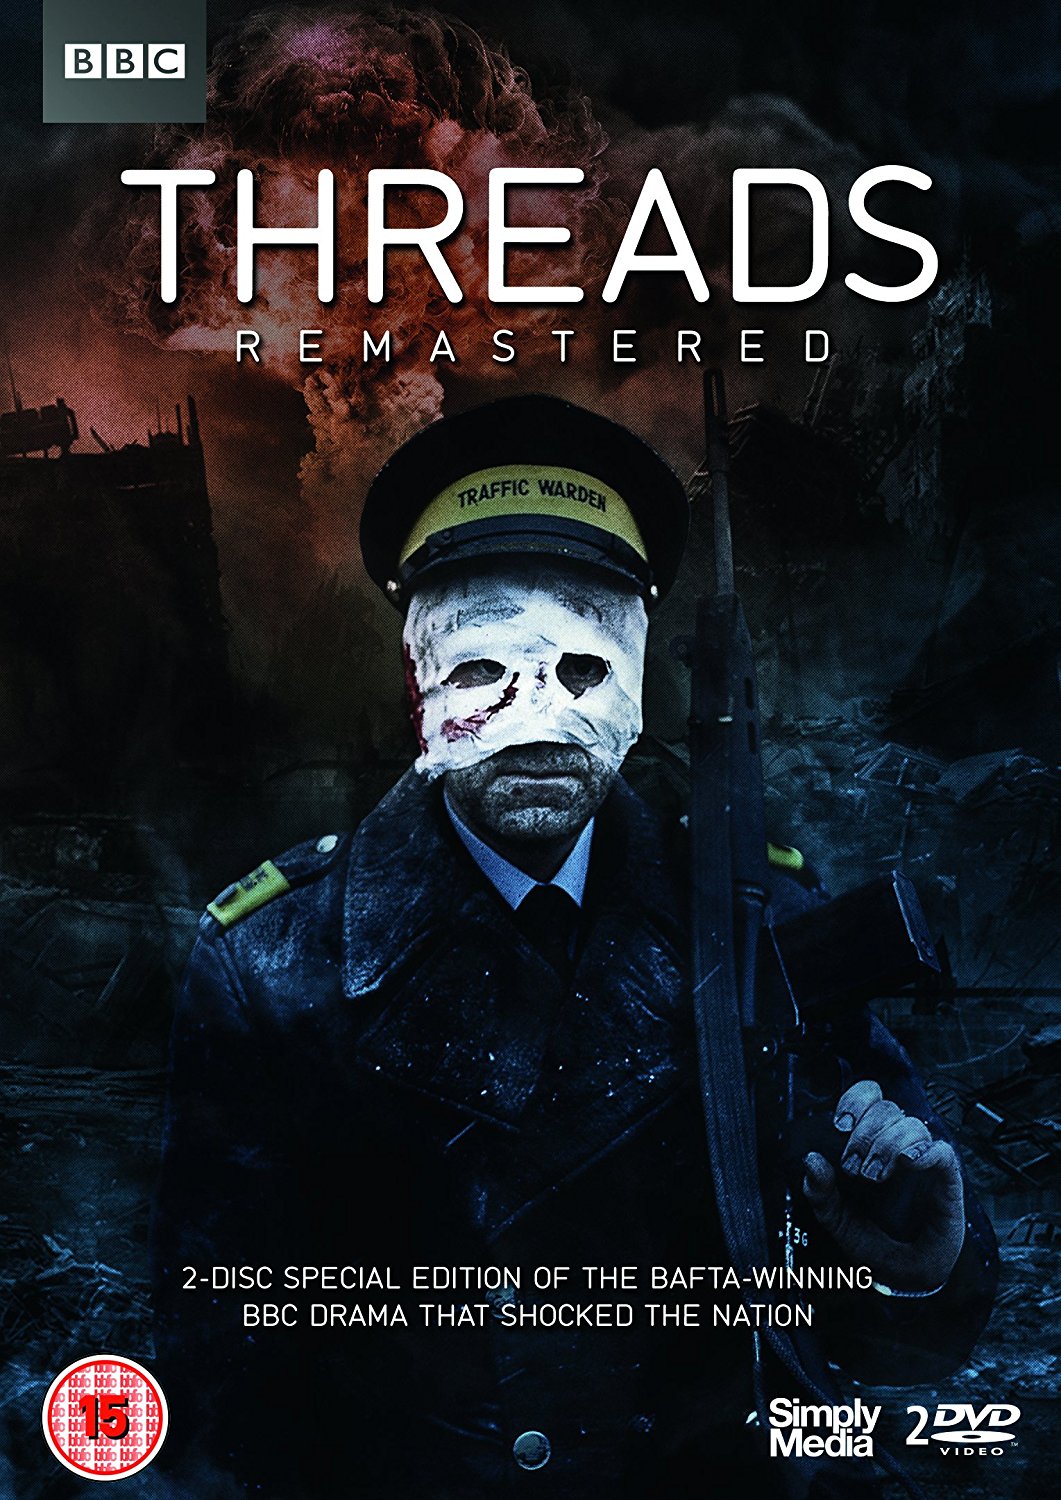 Threads remastered DVD review: this is the way the world ends